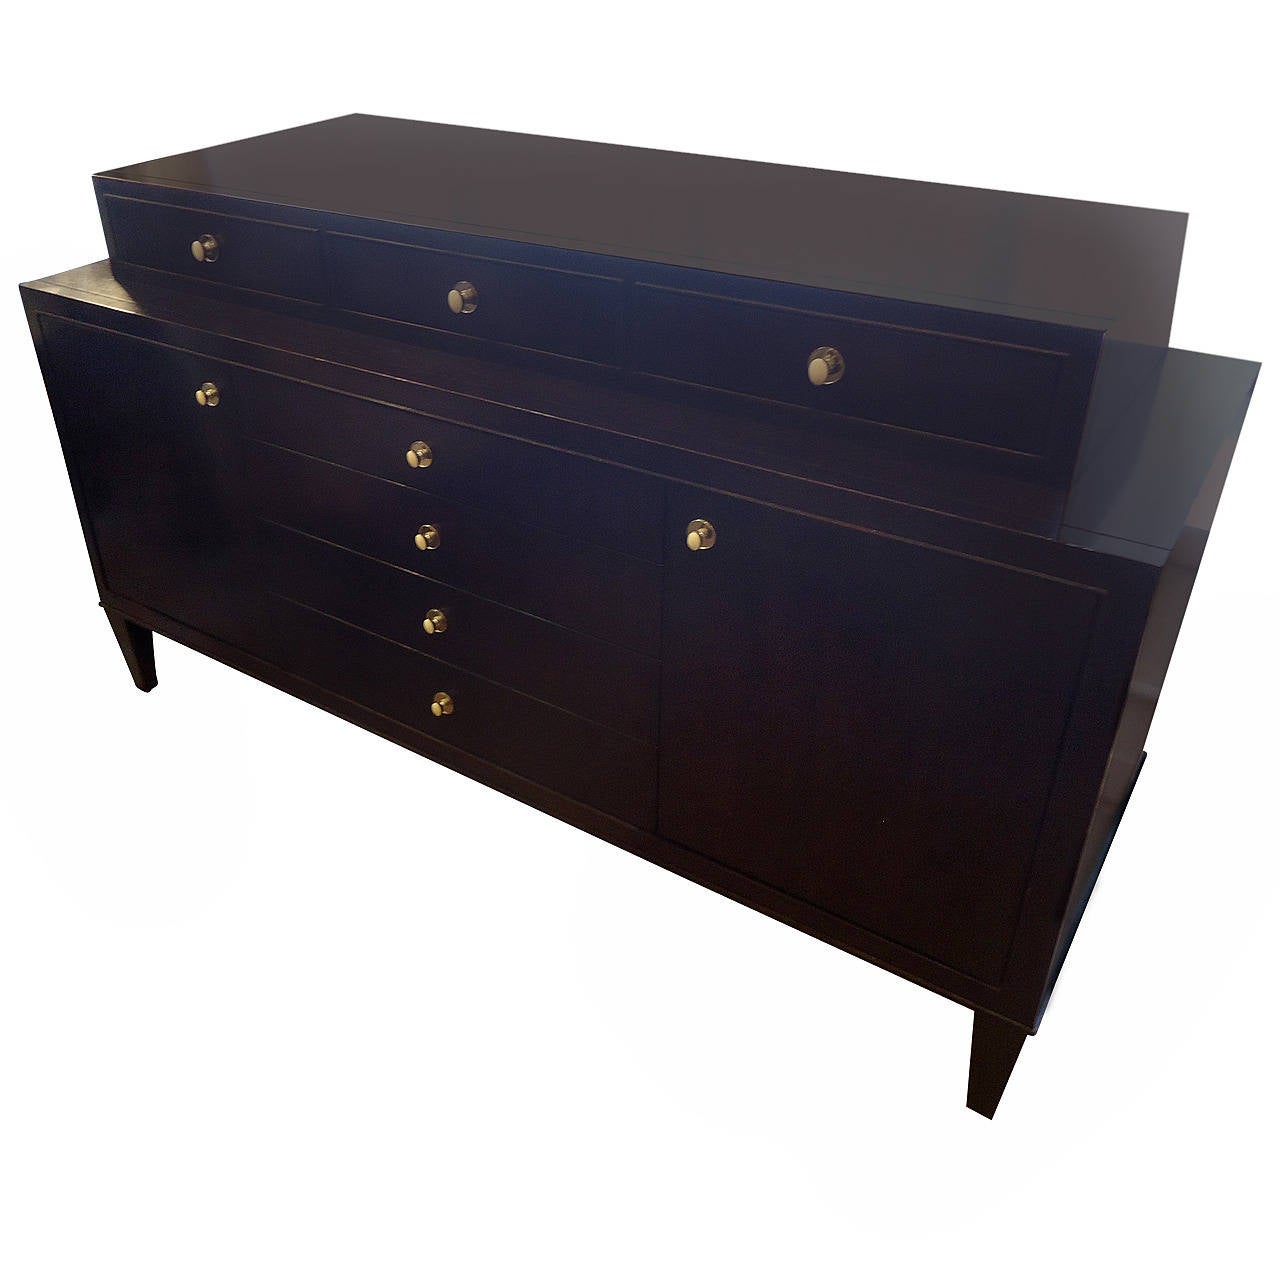 Very sophisticated and functional sideboard in ebonized wood with oval nickel silver and white enamel hardware. Two levels. Top level has three drawers, and sits on top of the lower commode which has two doors on each front side that open to